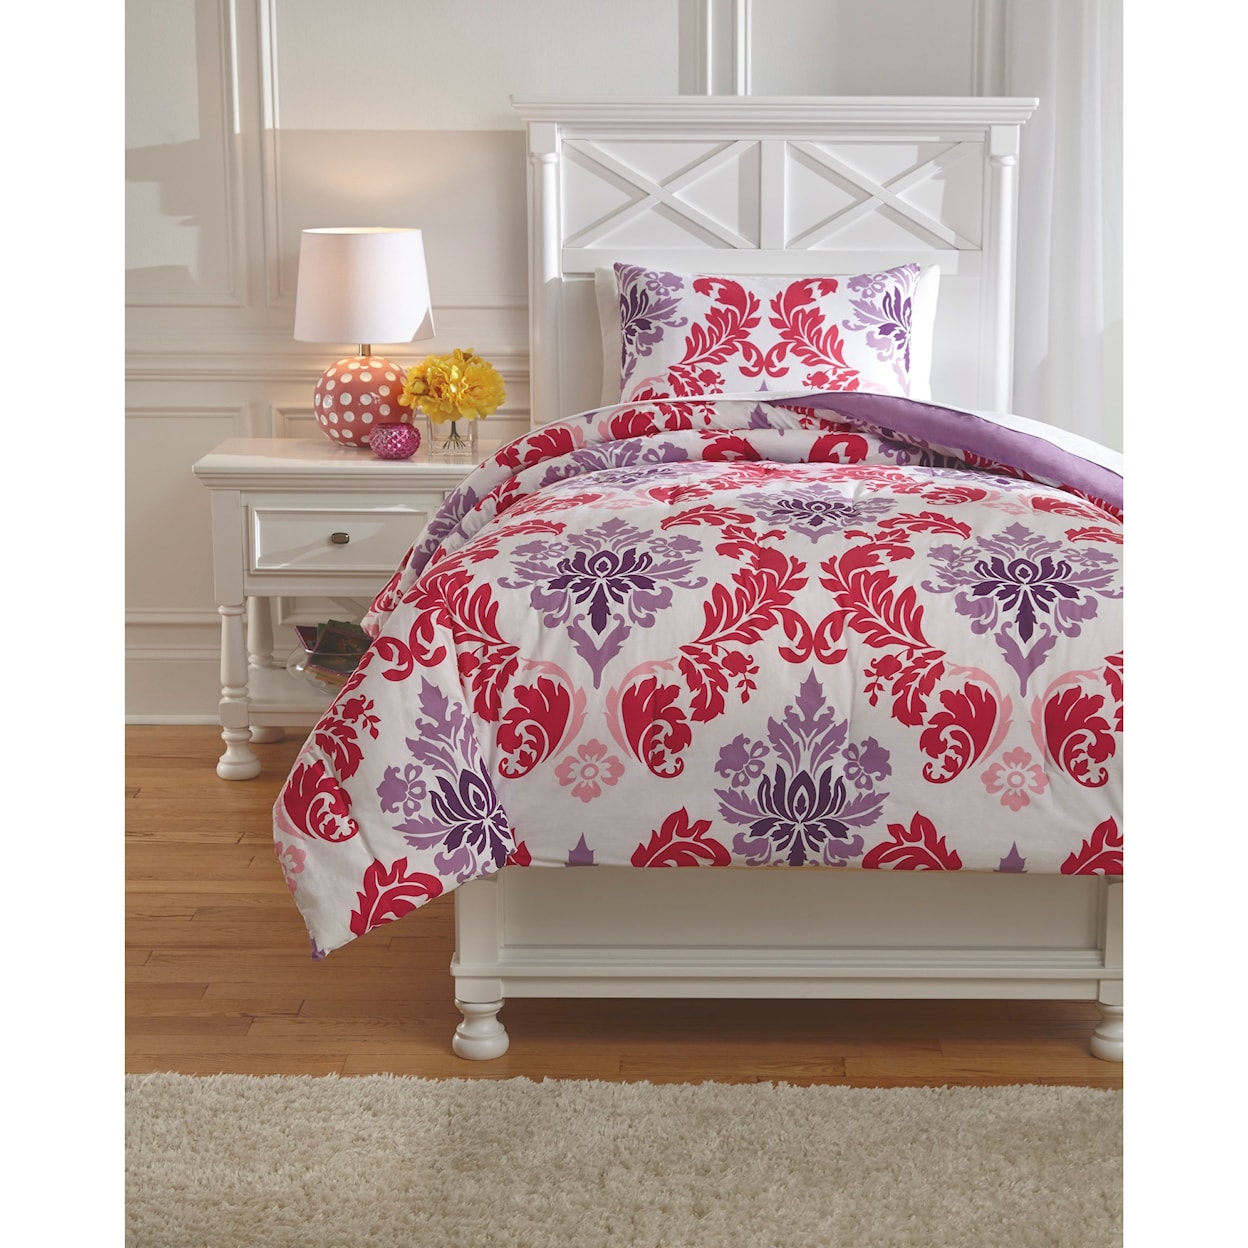 Signature Design by Ashley Bedding Sets Twin Ventress Berry Comforter Set